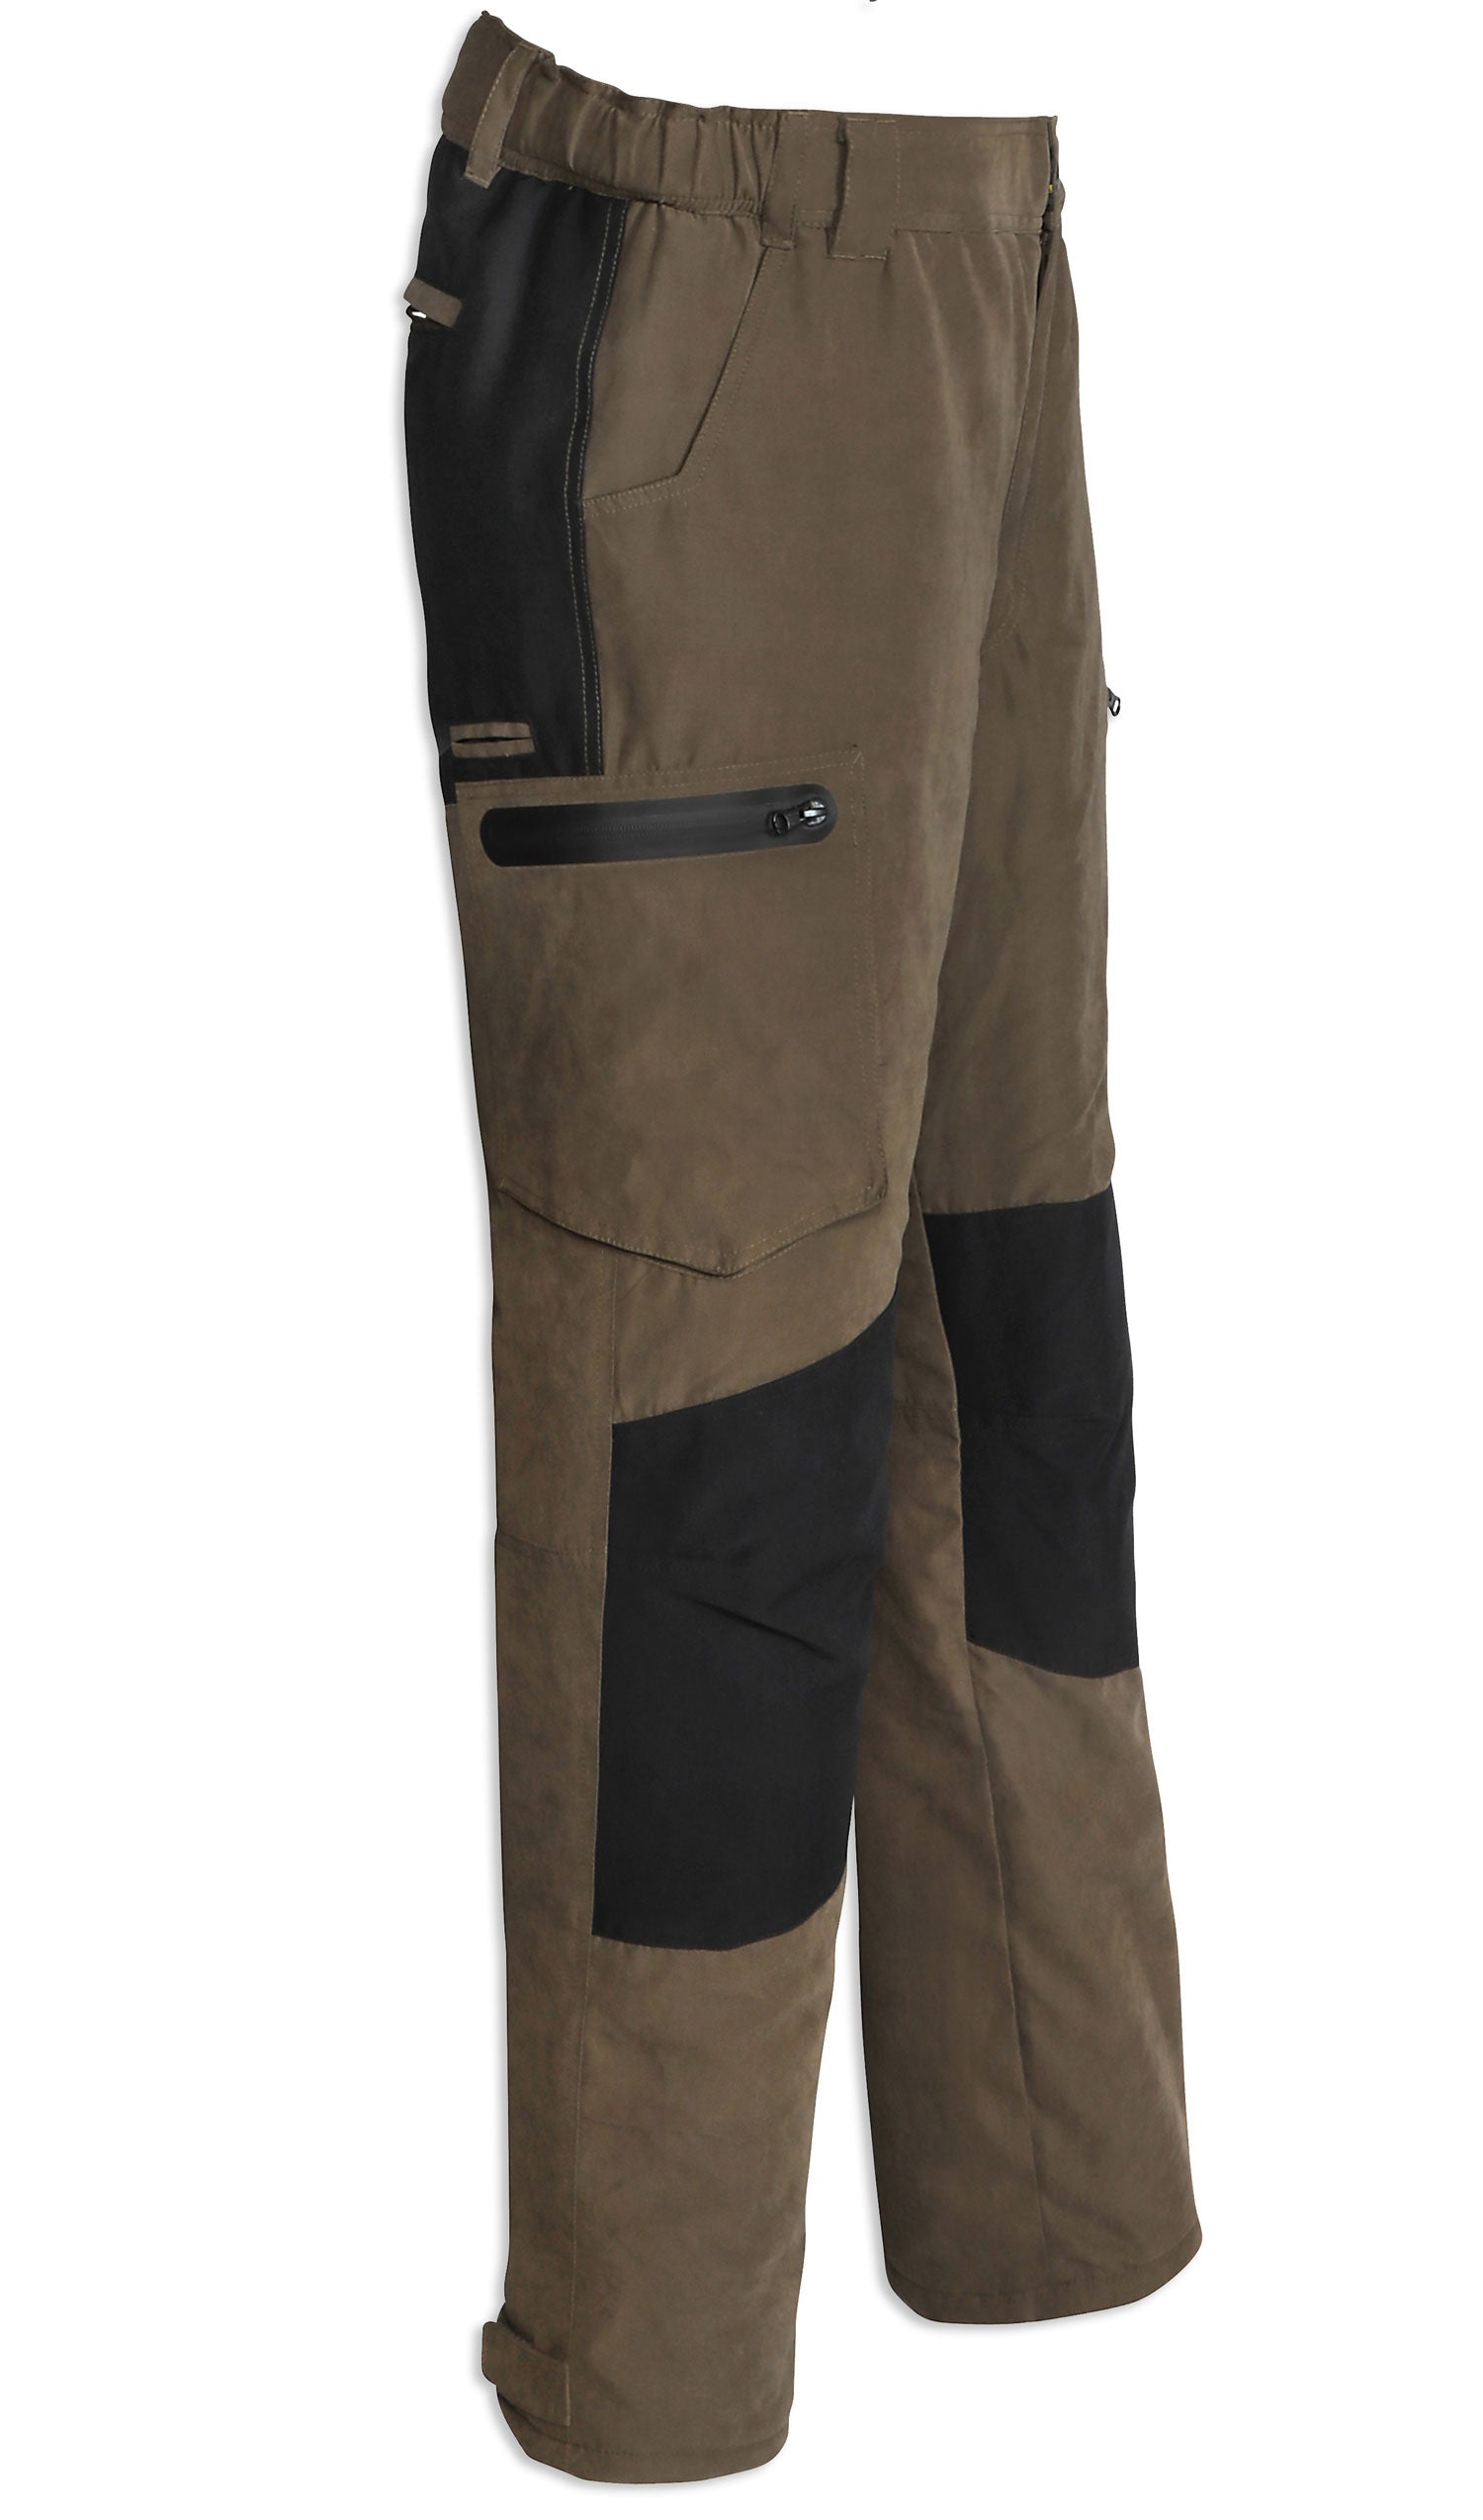 Trousers Verney Carron Marco Polo Salopettes